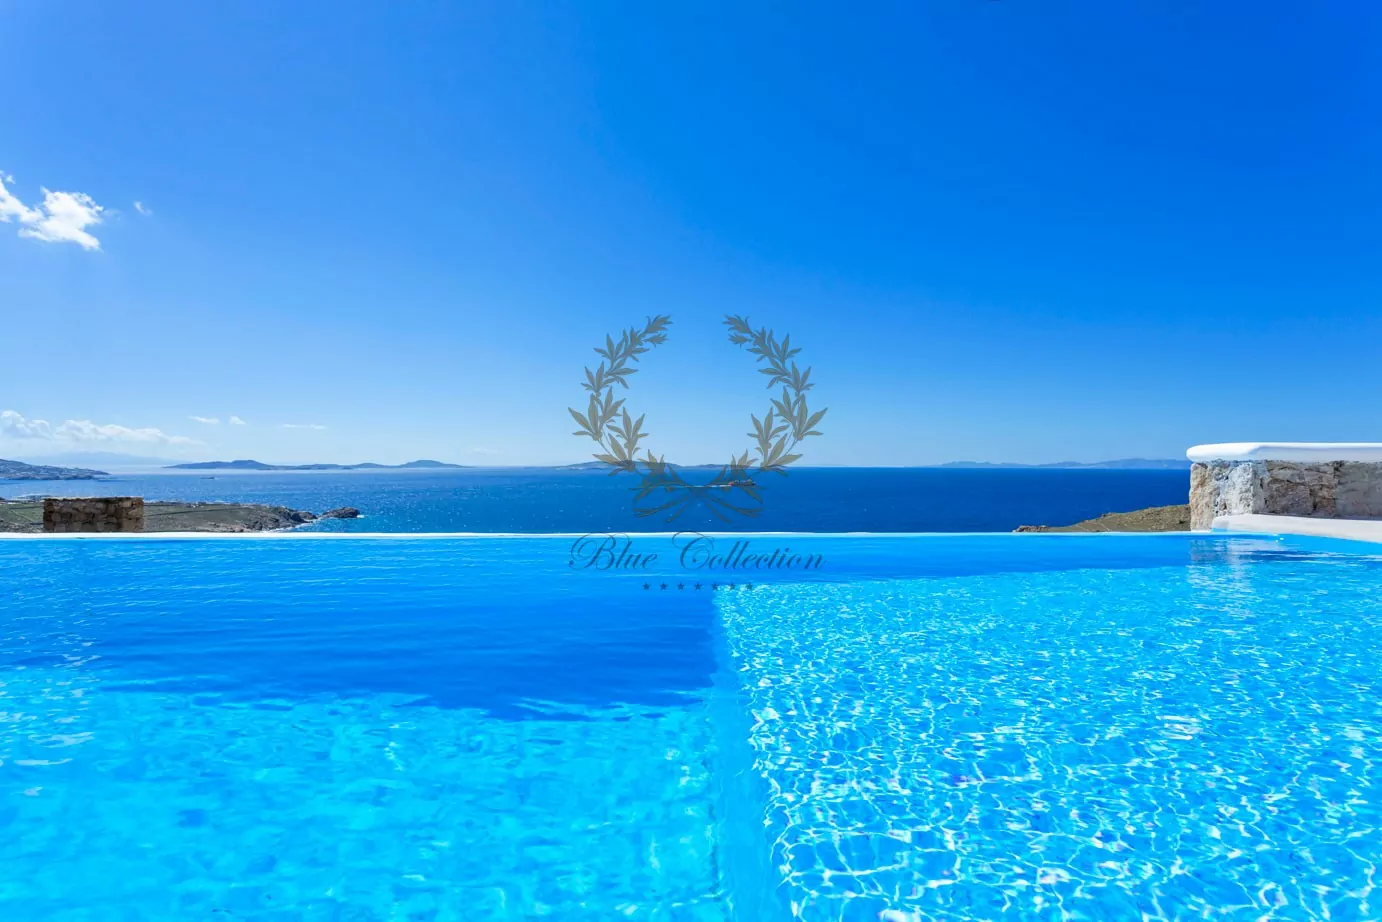 Mykonos | Choulakia - Senior Villa with Private Pool & Stunning views for rent | Sleeps 6 | 3 Bedrooms | 2 Bathrooms | REF: 18041284 | CODE: CLA-2